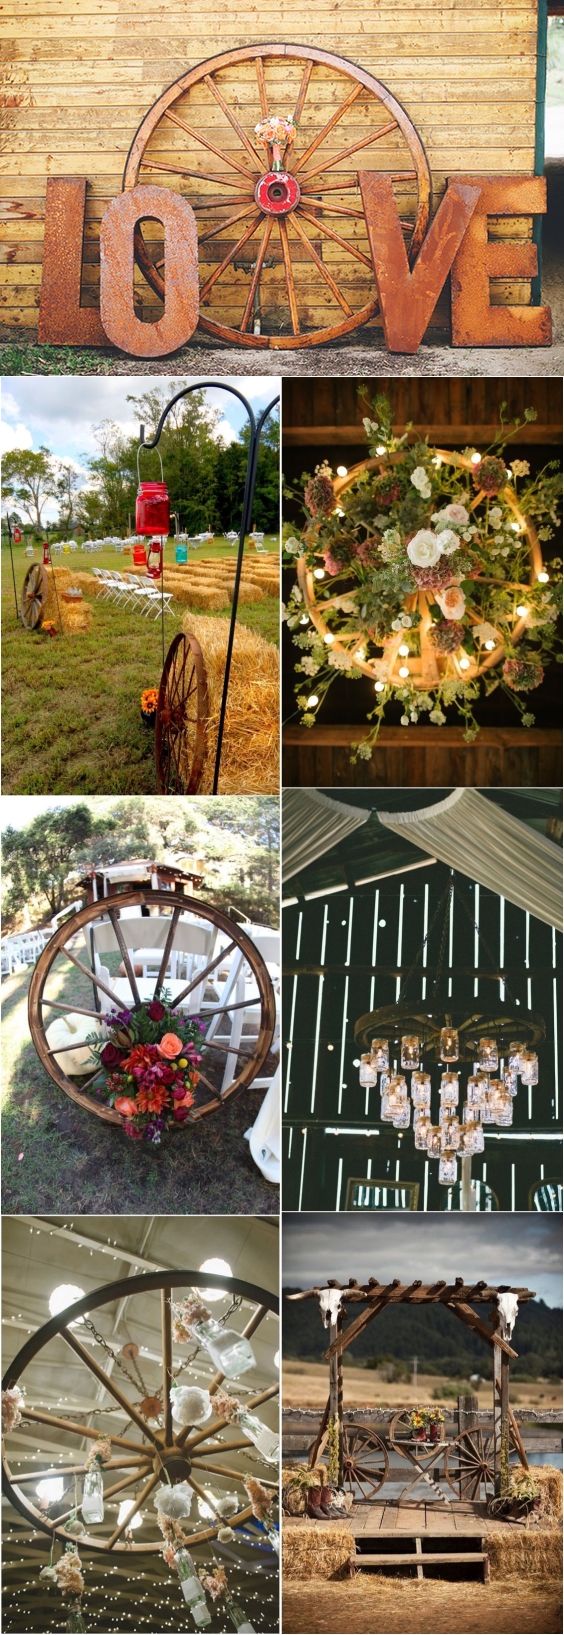 Rustic Country Wedding Ideas with Wagon Wheel Details